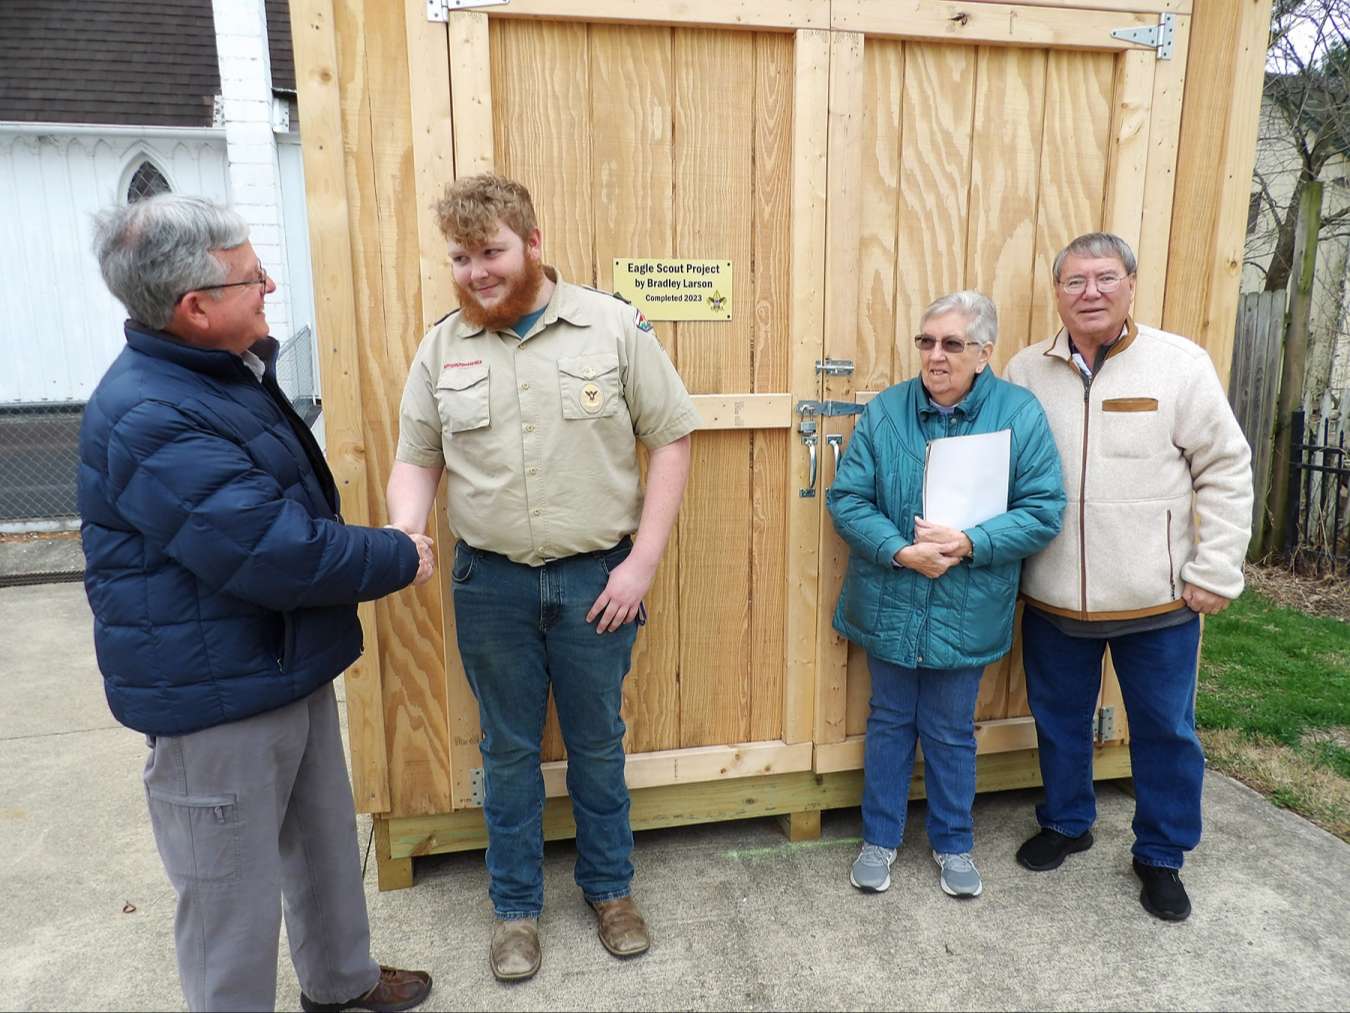 gray haired main in winter coat shakes hand of young man with red beard wearing tan scouting shirt in front of golden wood lumber shed door